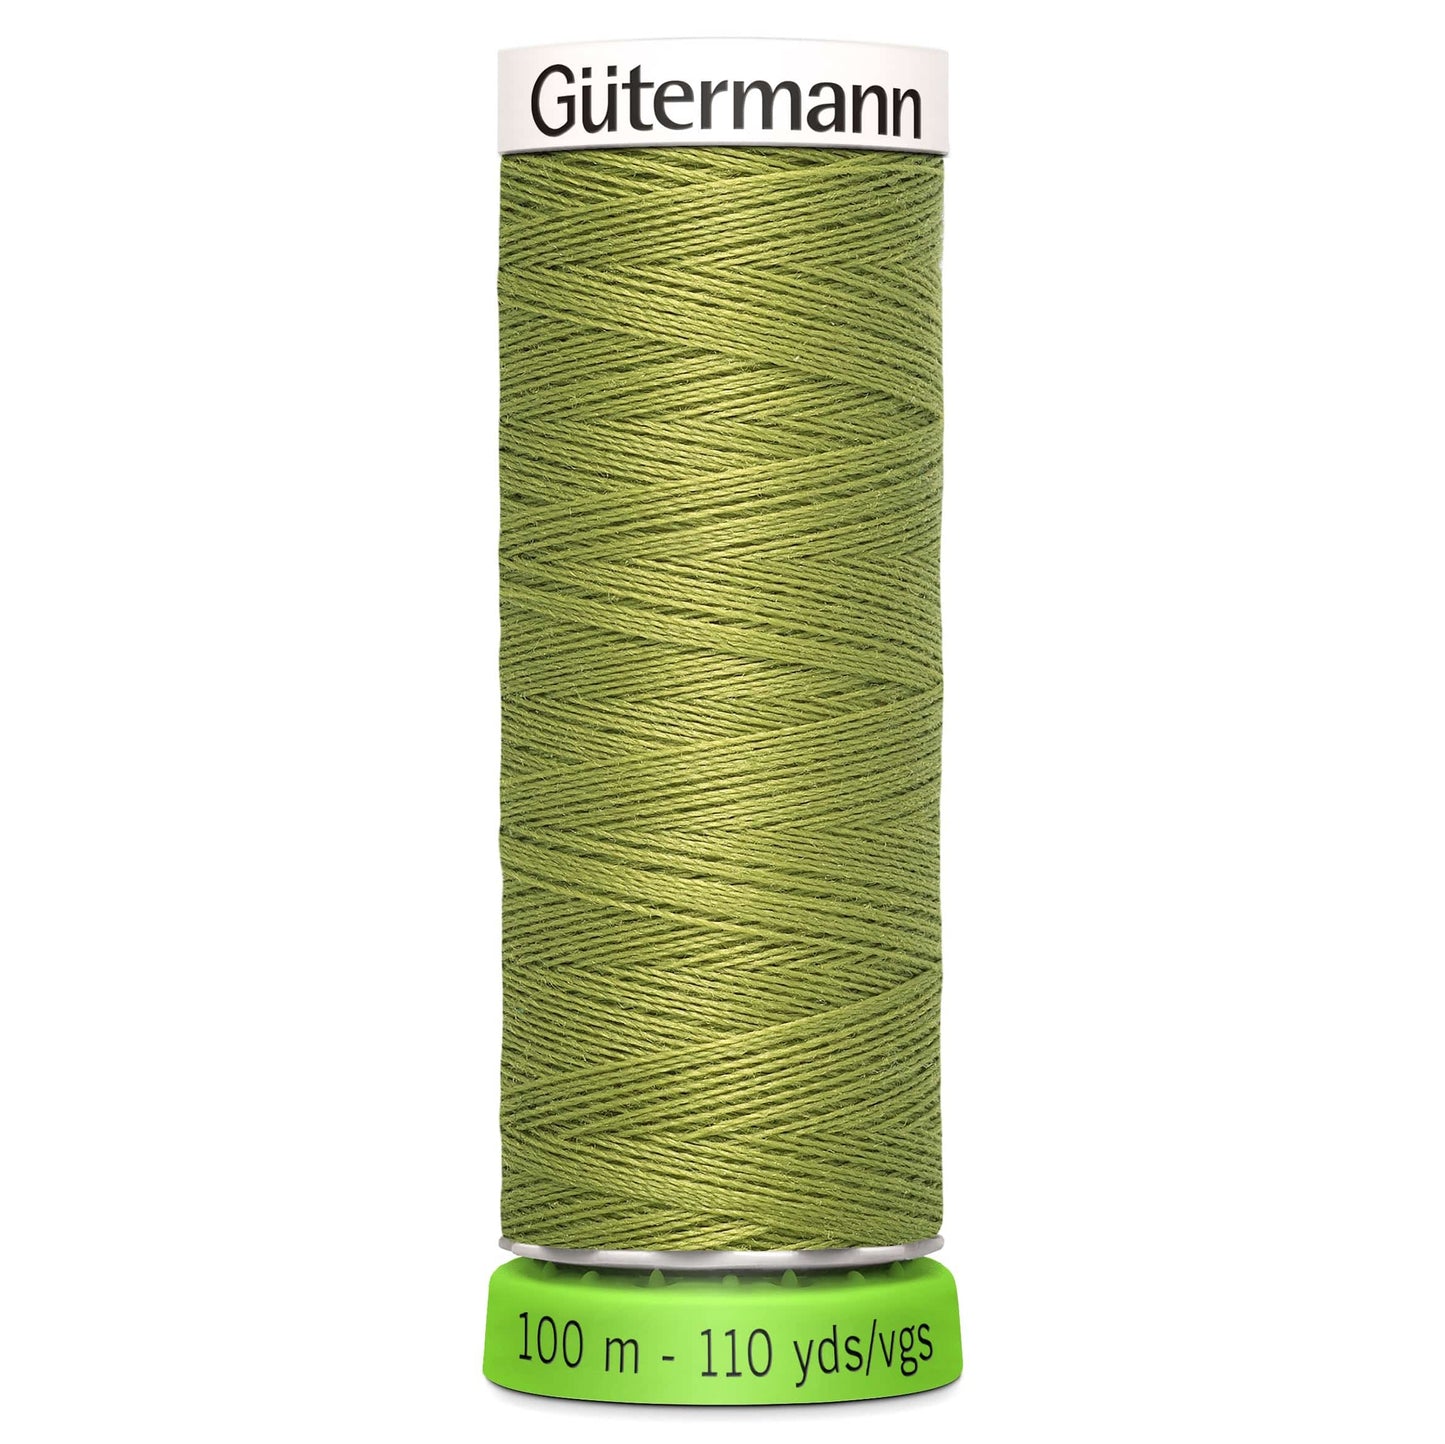 100 m Reel Gütermann Recycled Sew-All Thread in Lime Green no. 582